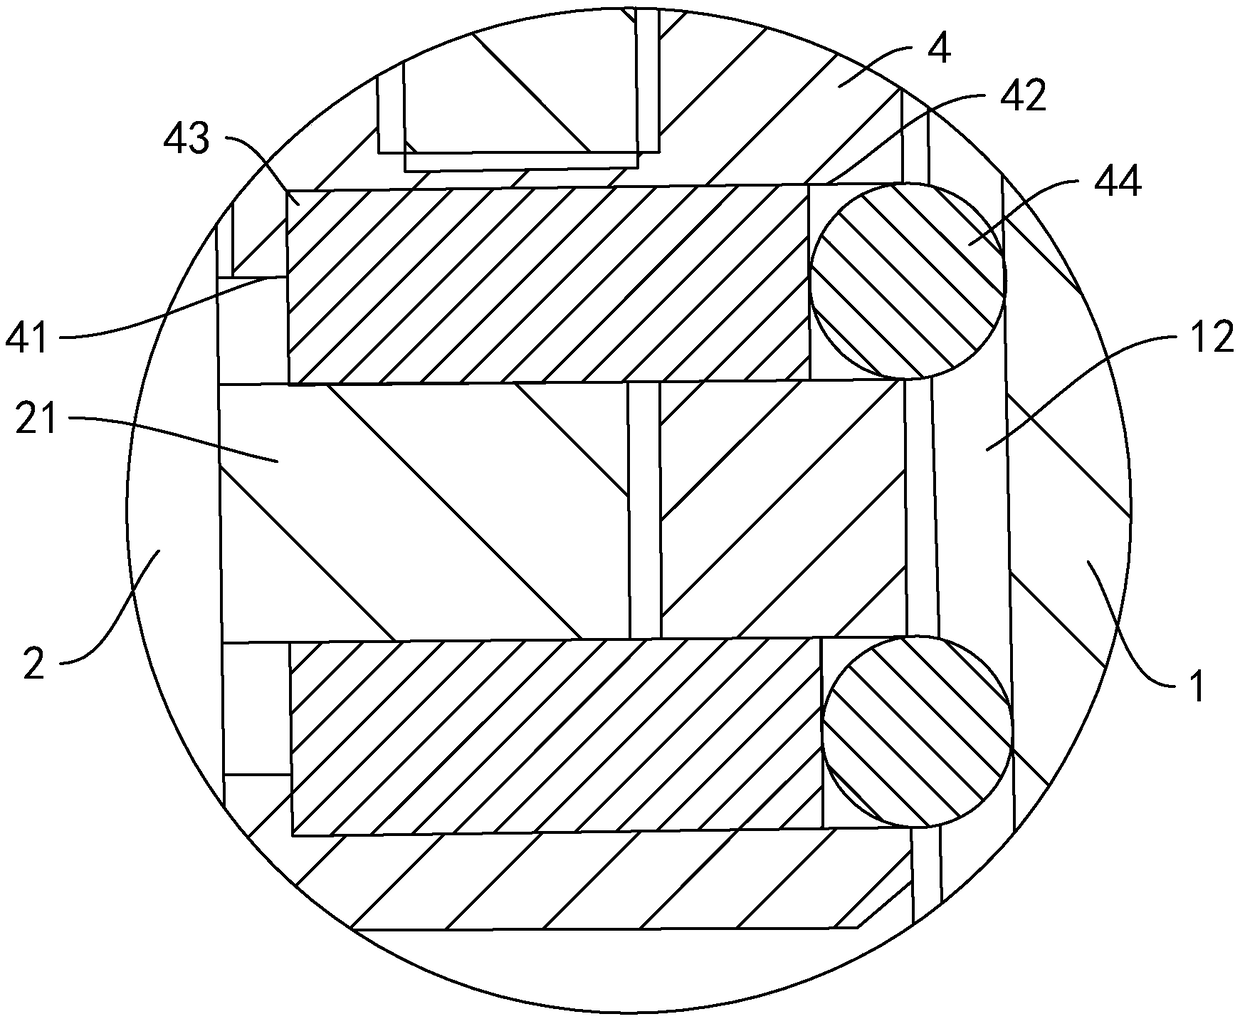 Swash plate bearing structure used for compressor